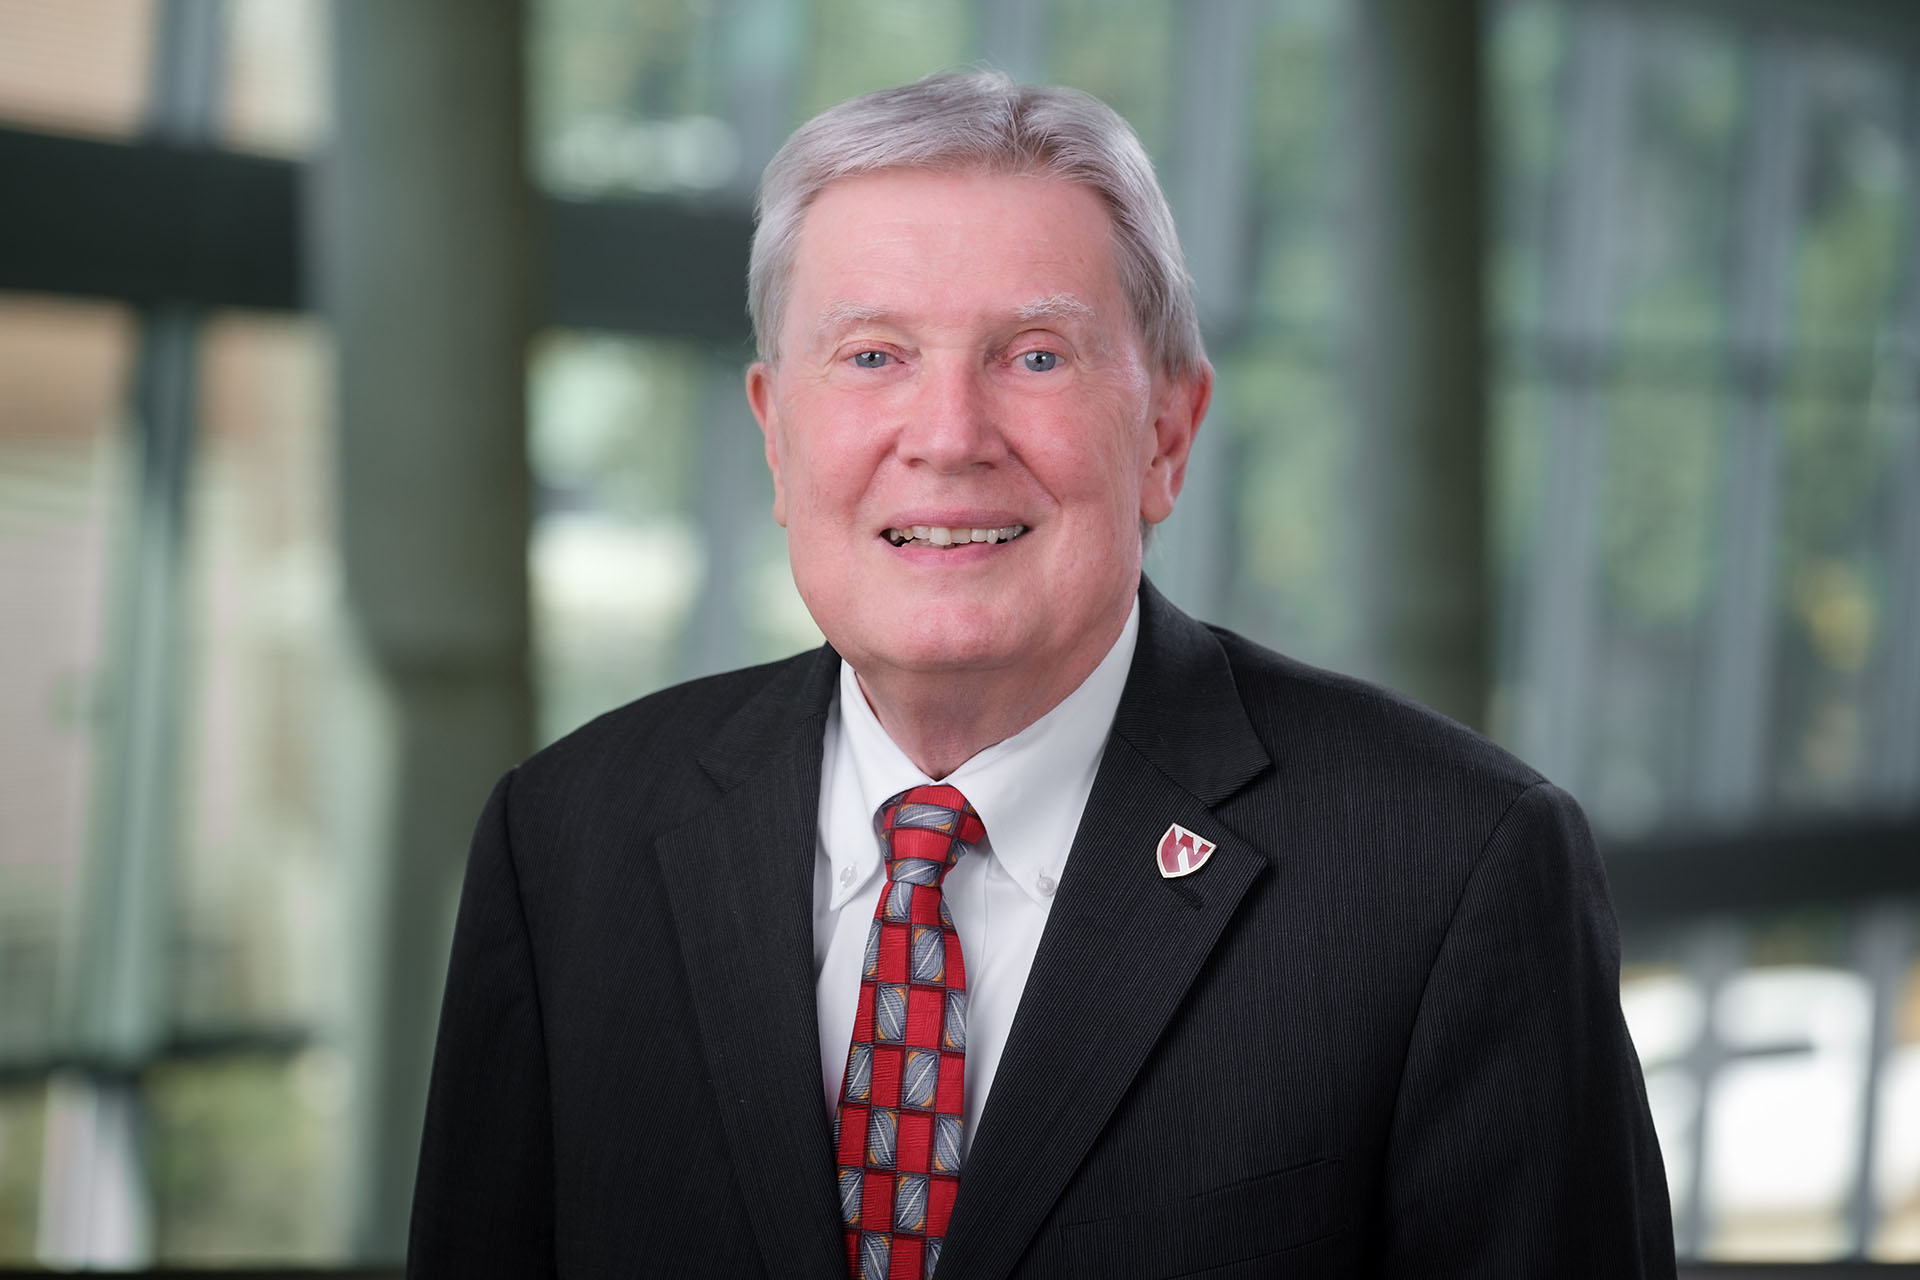 Bob Bartee&comma; former UNMC vice chancellor for external relations